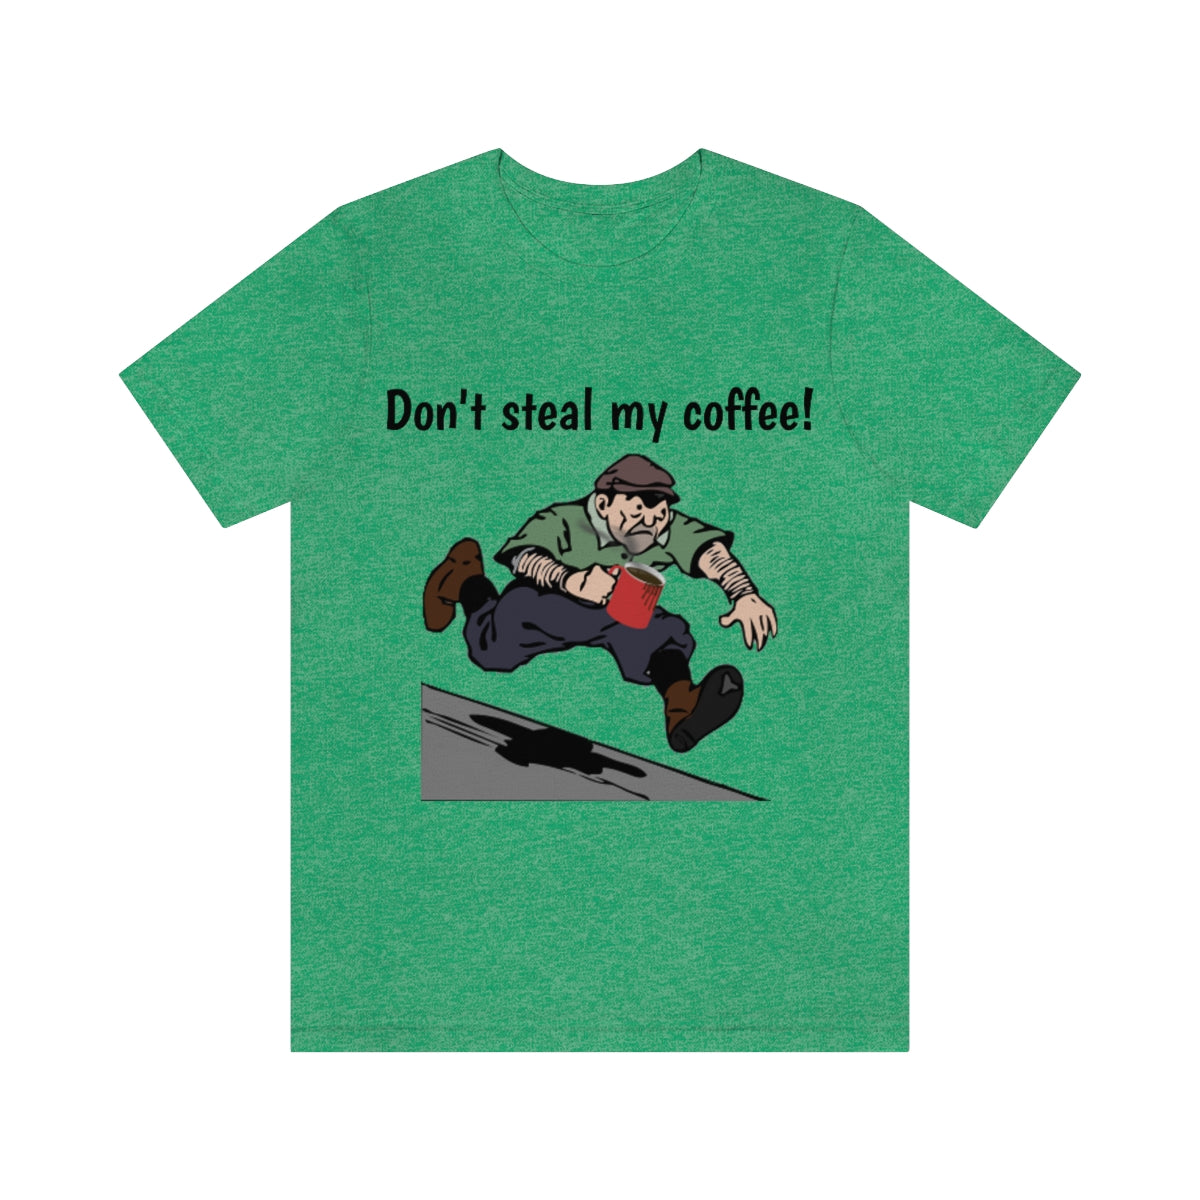 Don't steal my coffee! - Funny Unisex Short Sleeve Tee - CrazyTomTShirts